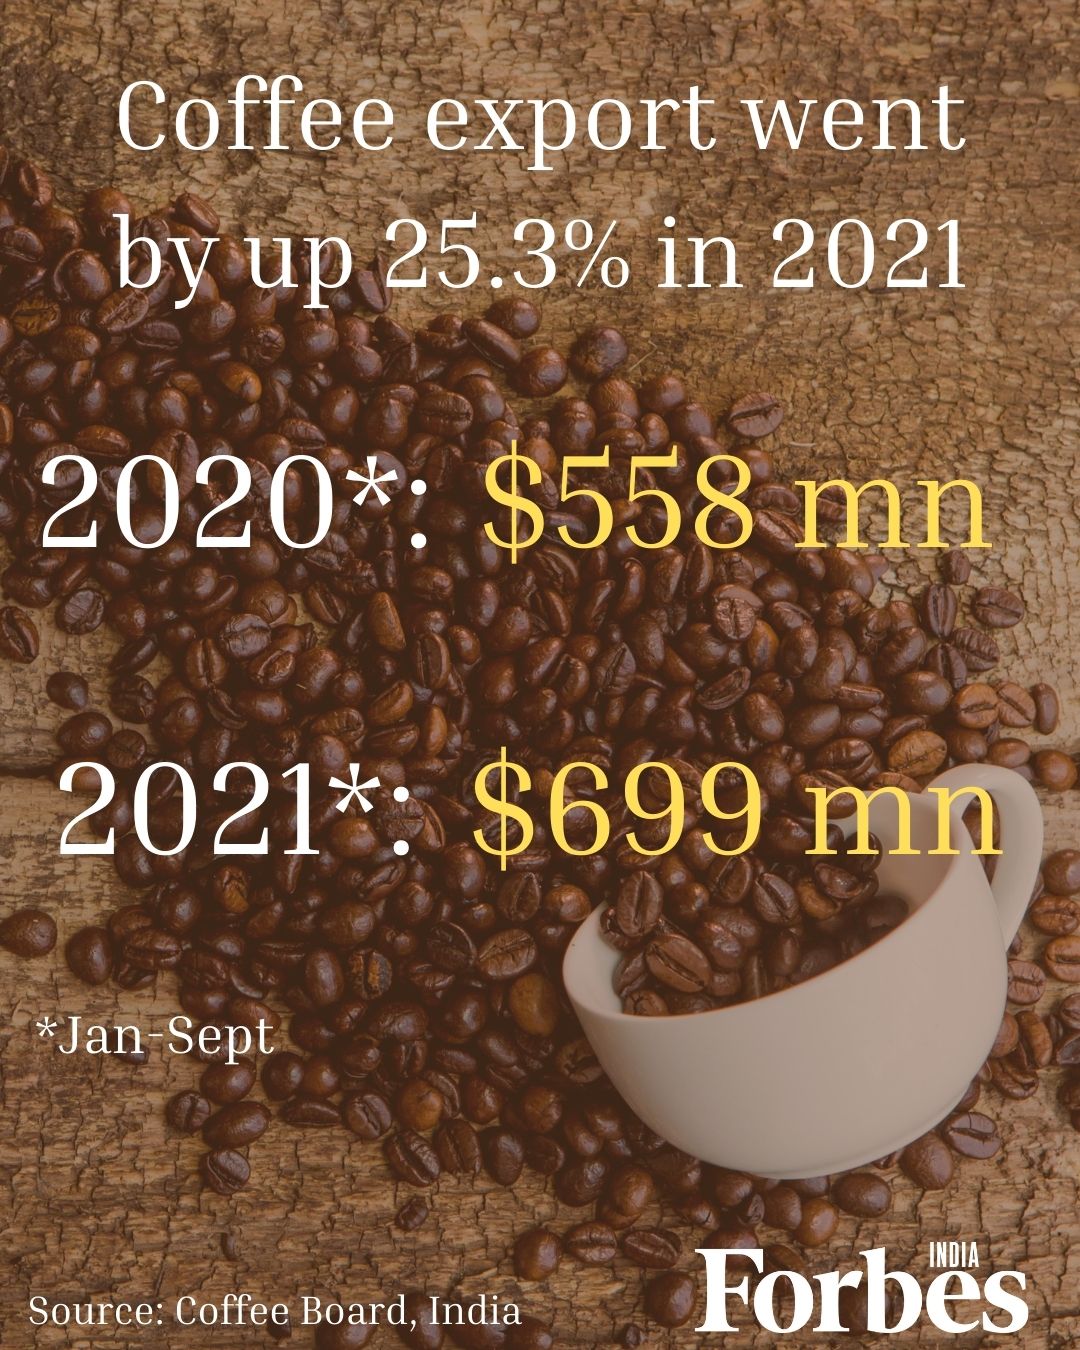 International Coffee Day: India's coffee exports up over 25% in 2021; over 3% of the world's coffee is Indian